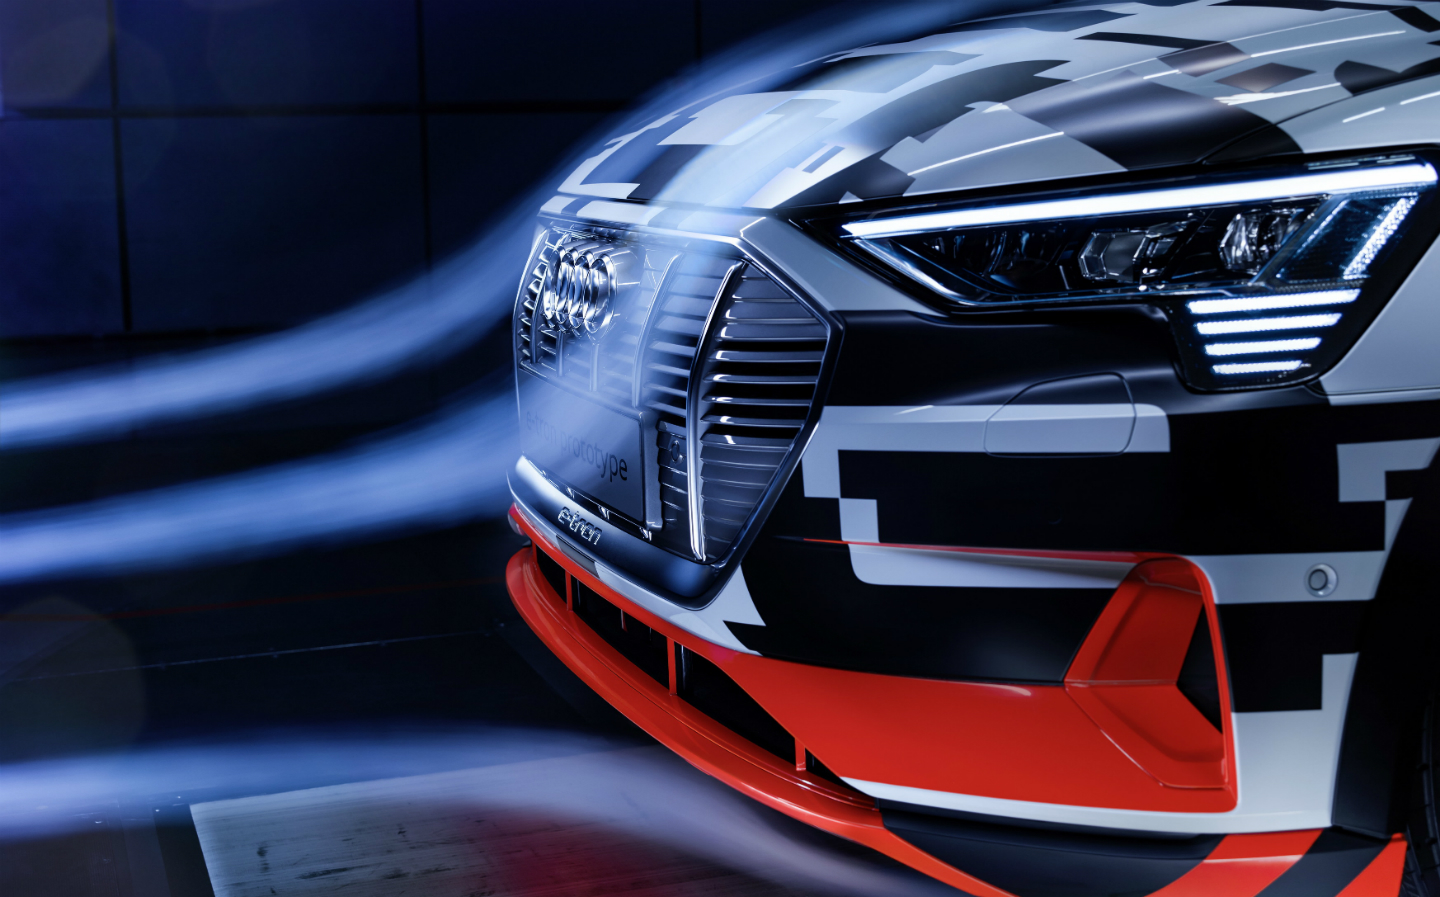 Audi-e-tron-electric-SUV-features-moving-vents-and-grille-to-maximise-aero-efficiency